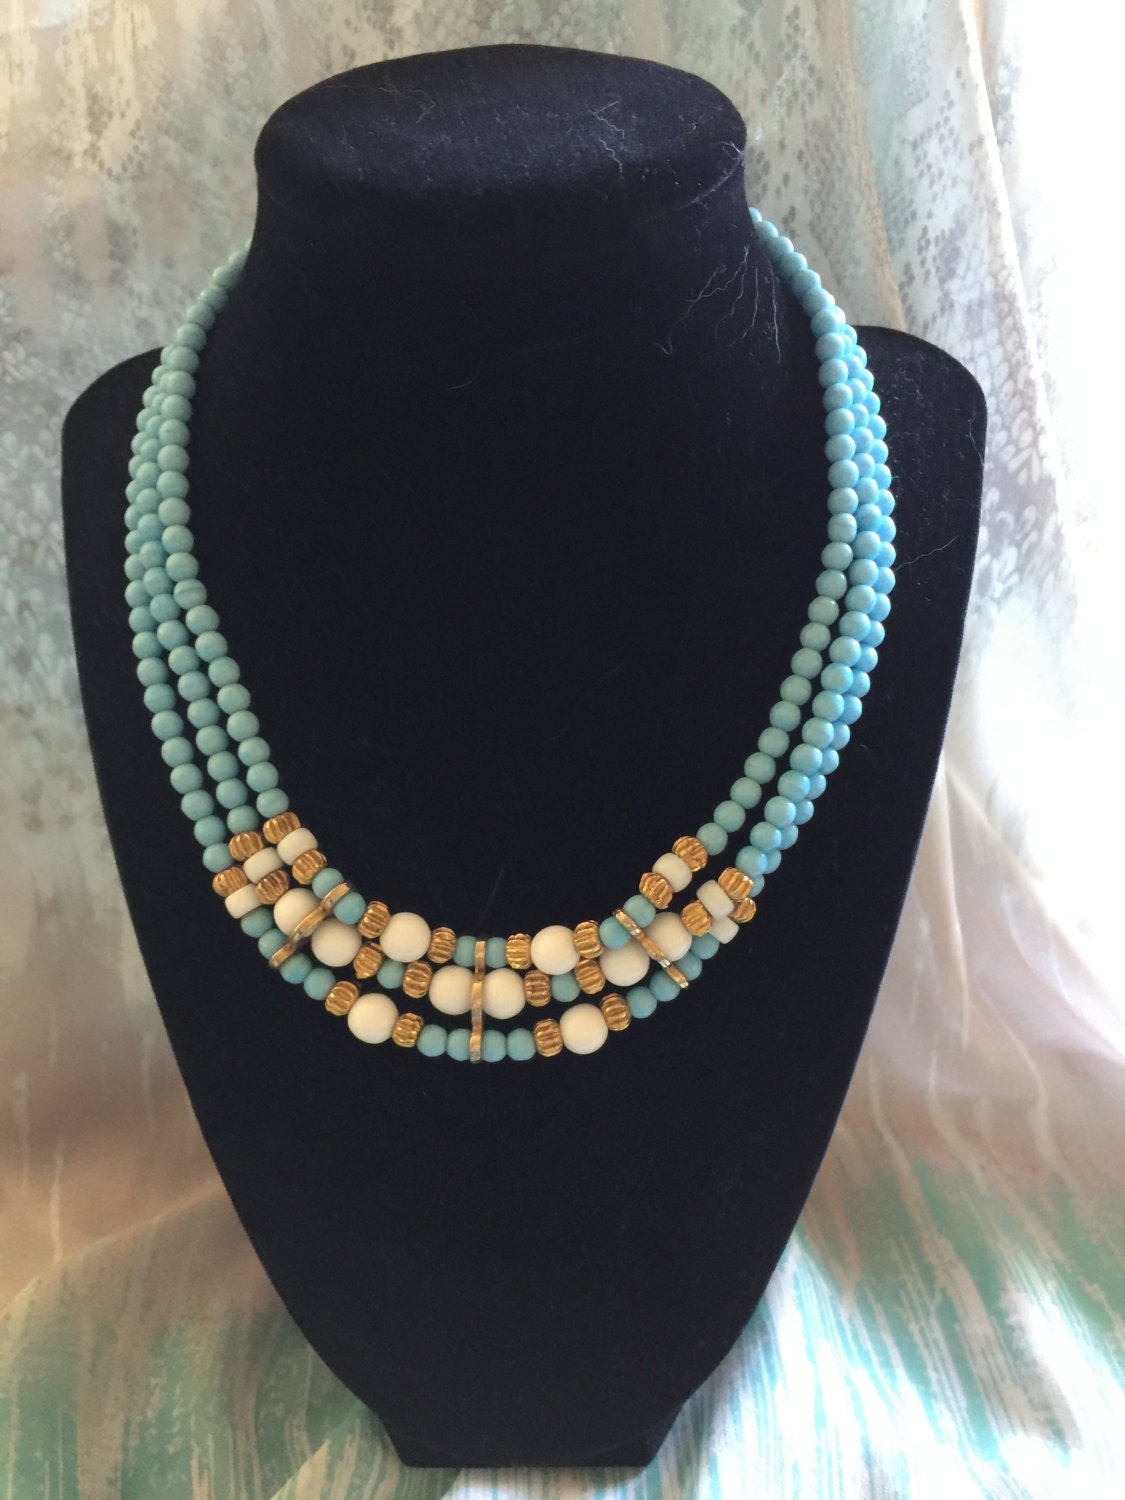 80s Multi Strand Faux Turquoise and Milk Glass Bead Necklace - Etsy